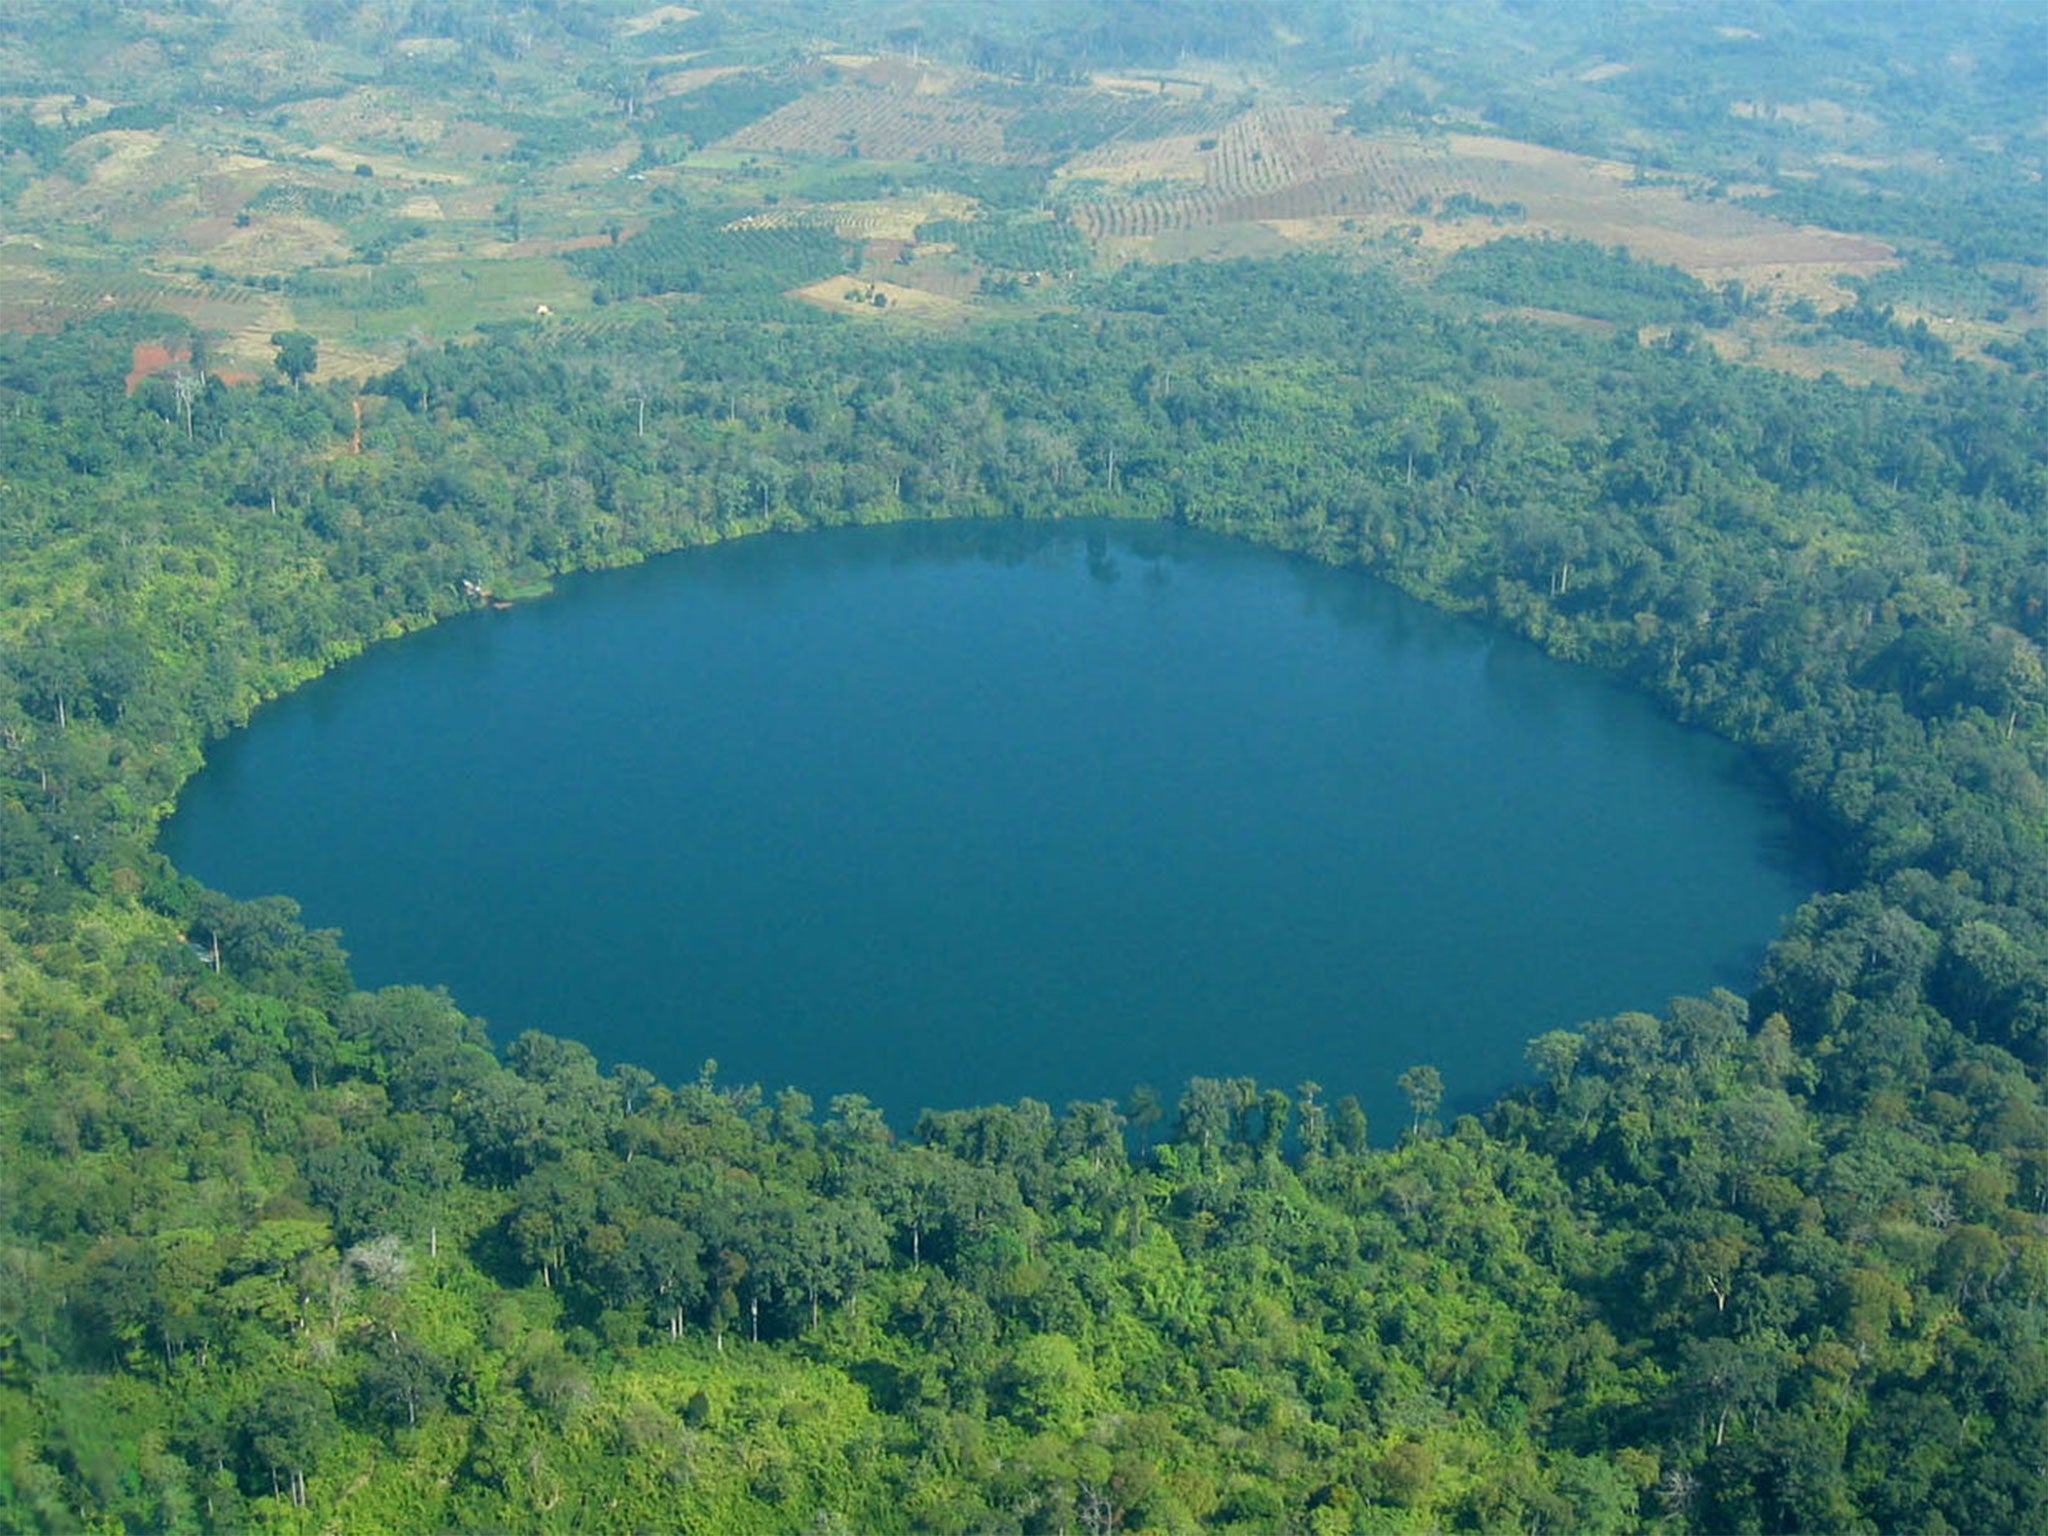 The lake is a popular tourist destination surrounded by protected woodland